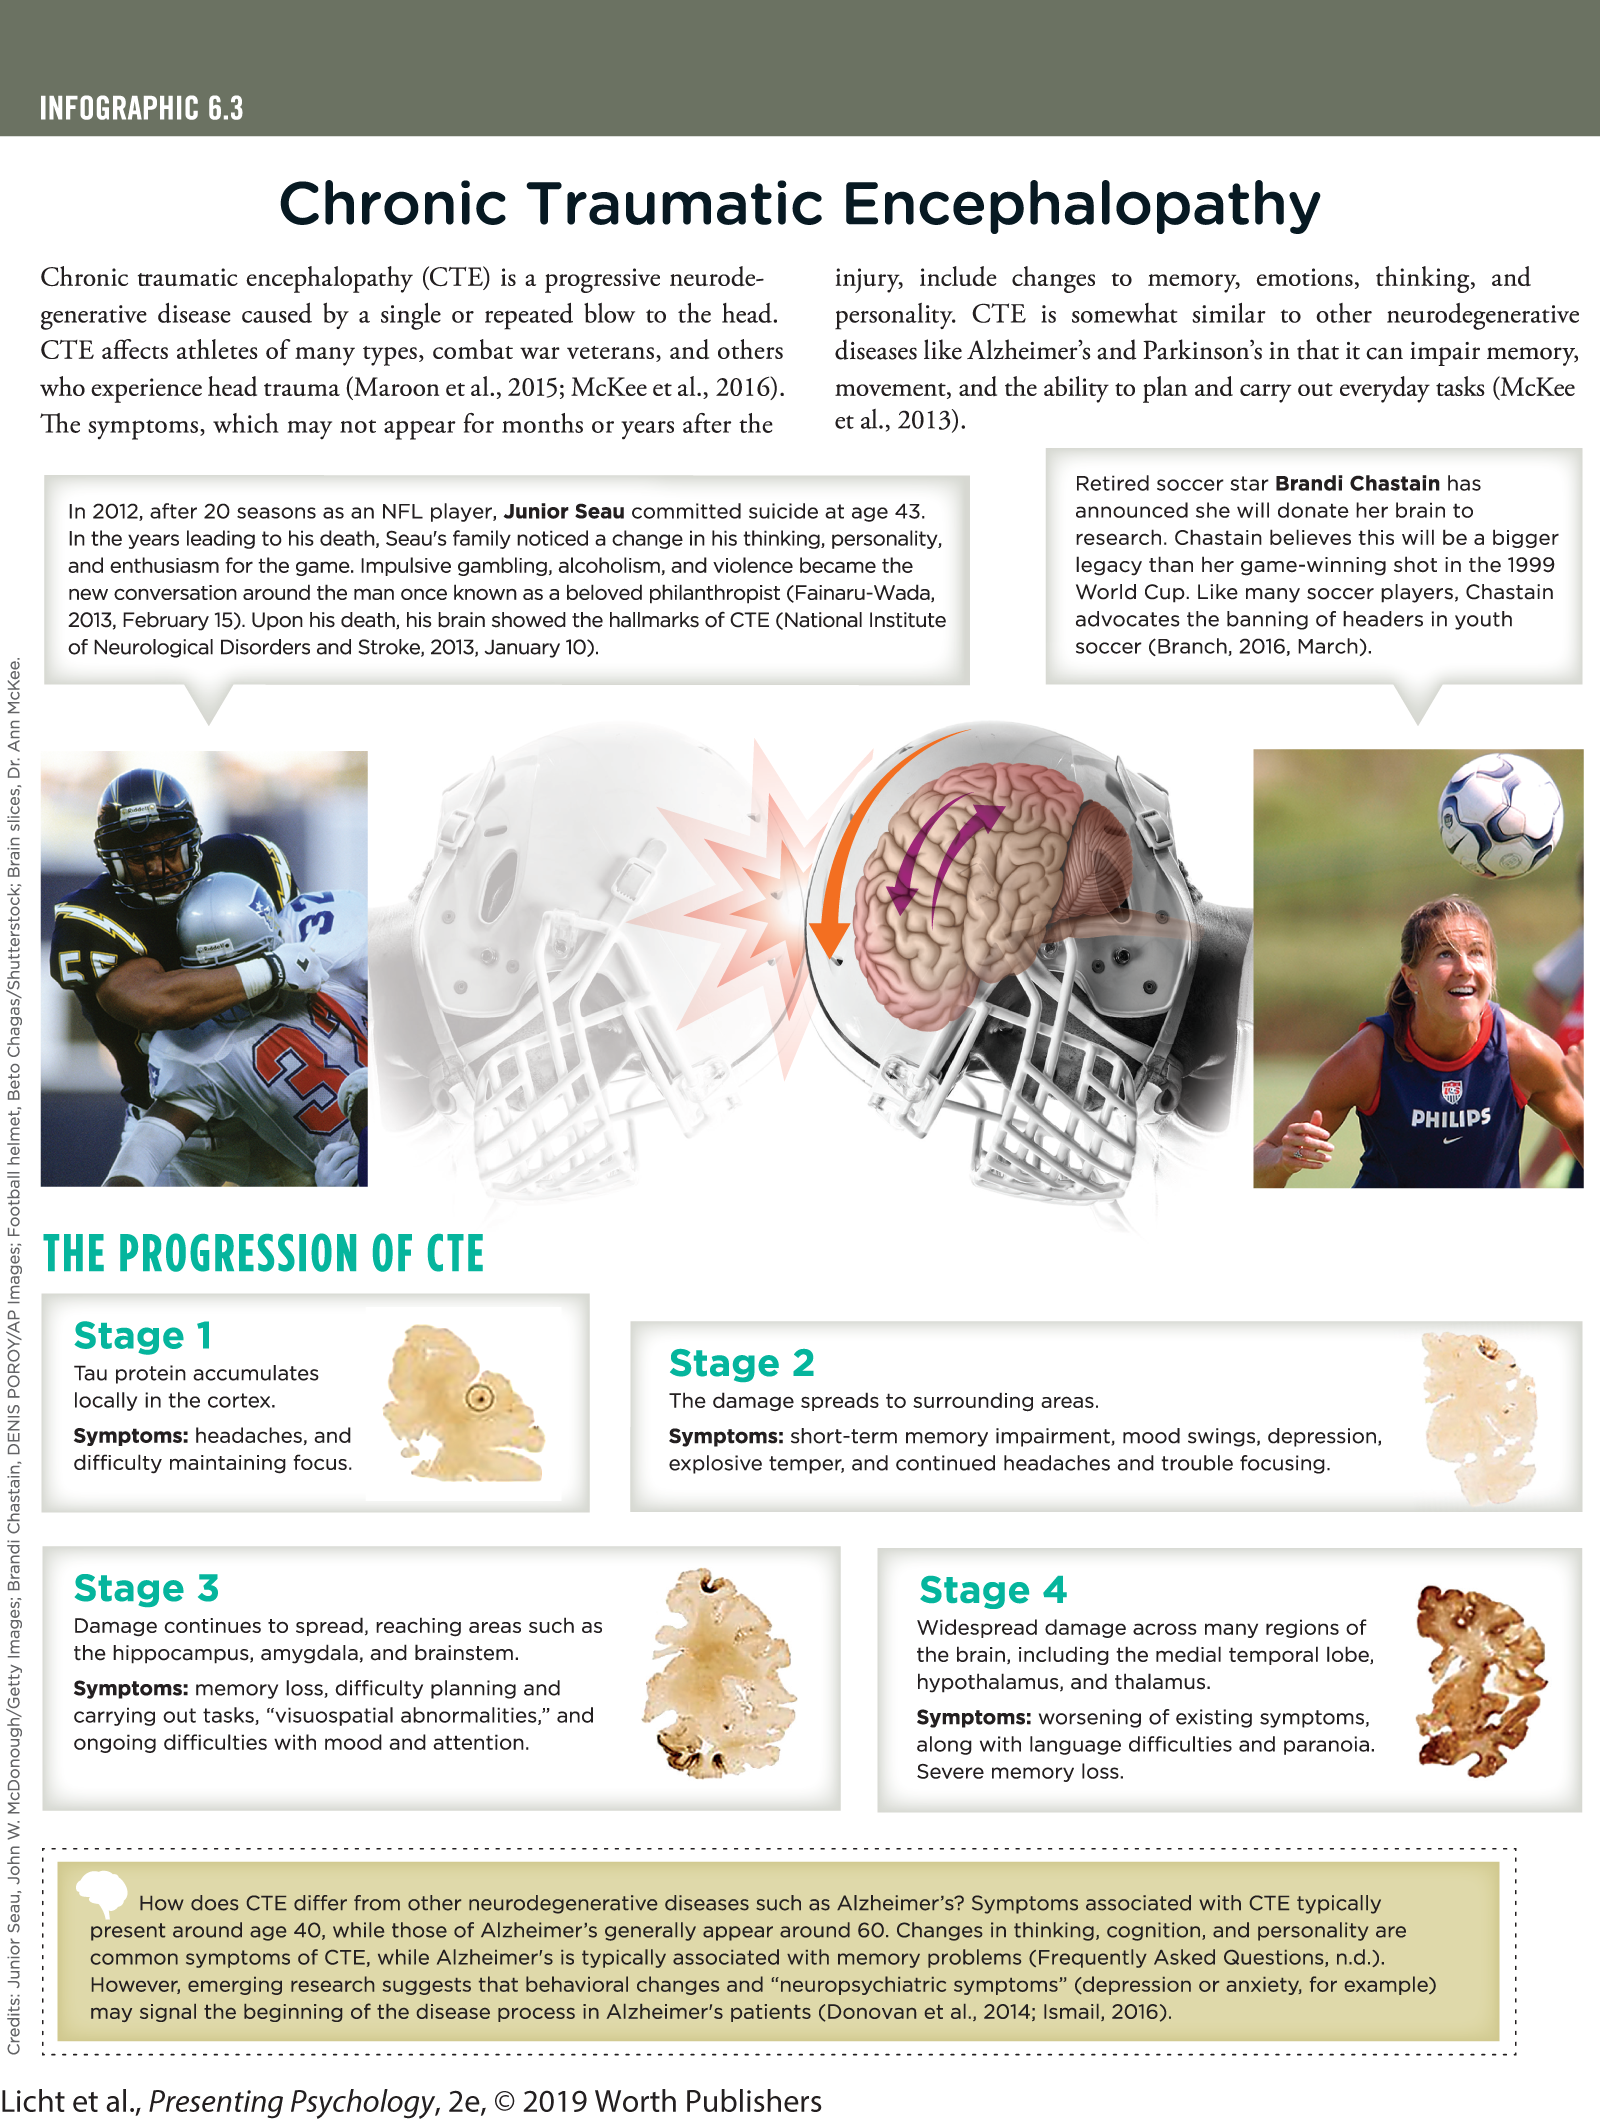 An infographic titled, Chronic Traumatic Encephalopathy shows the stages involved in the progression of CTE. You can read full description from the link below